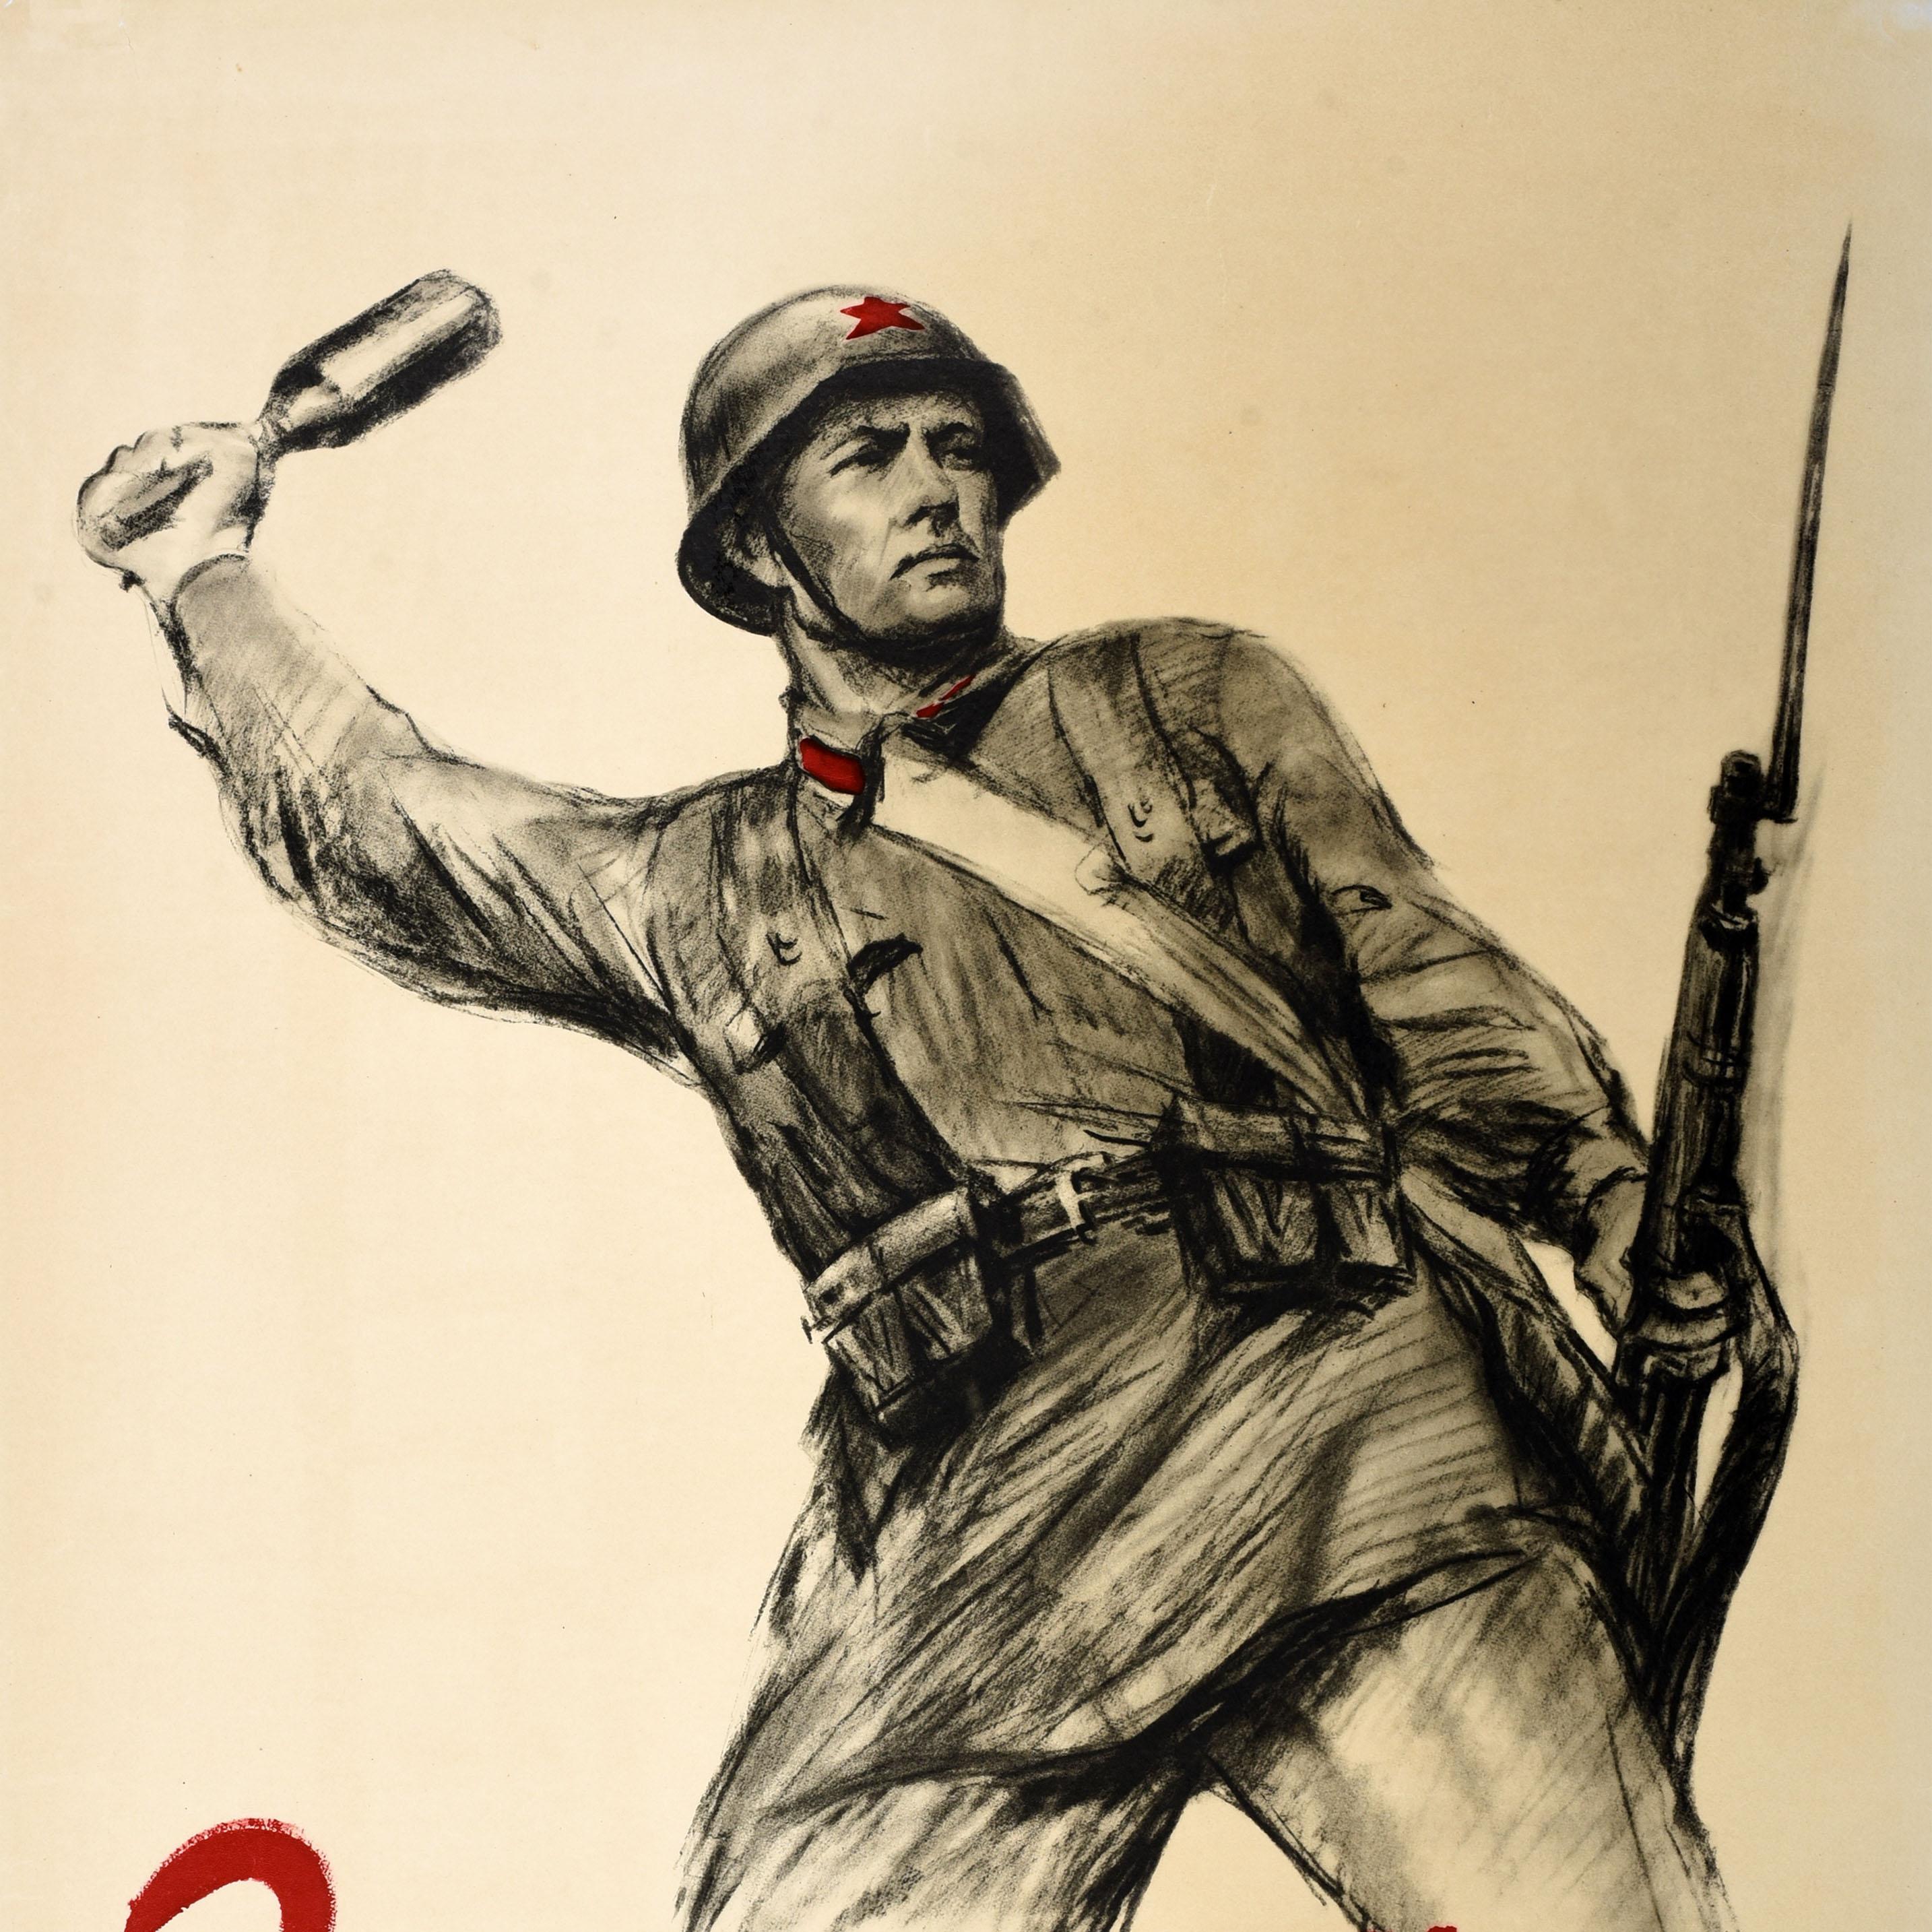 Rare original vintage World War Two propaganda poster issued in the Soviet Union - Defeat the Fascist Raiders / Разгромит фашистских налетчиков! - featuring dynamic black and white artwork depicting a Red Army soldier holding a bayonet rifle gun in